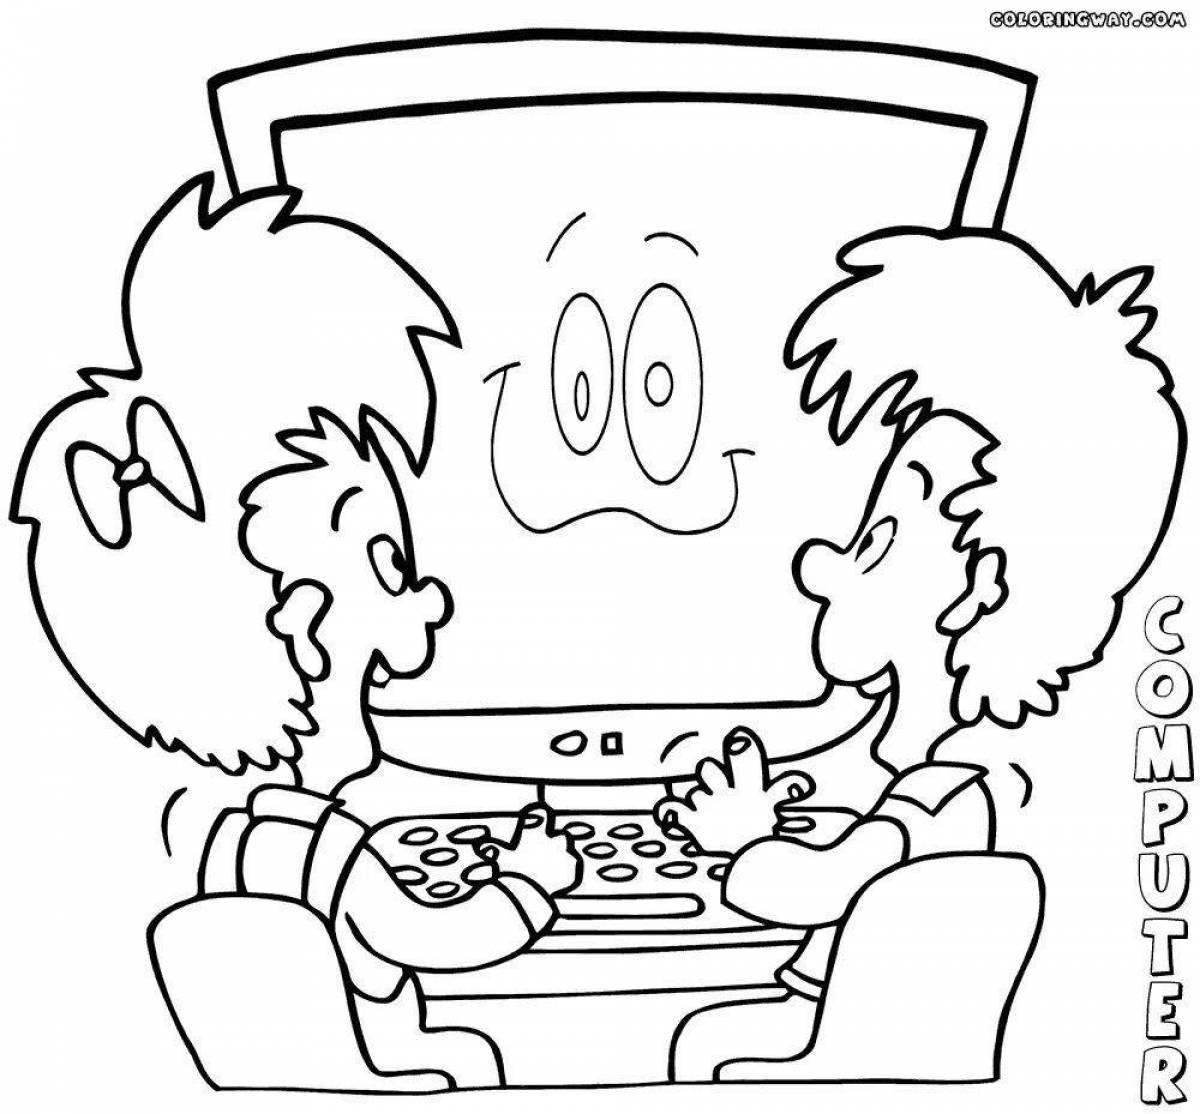 Great computer games coloring page